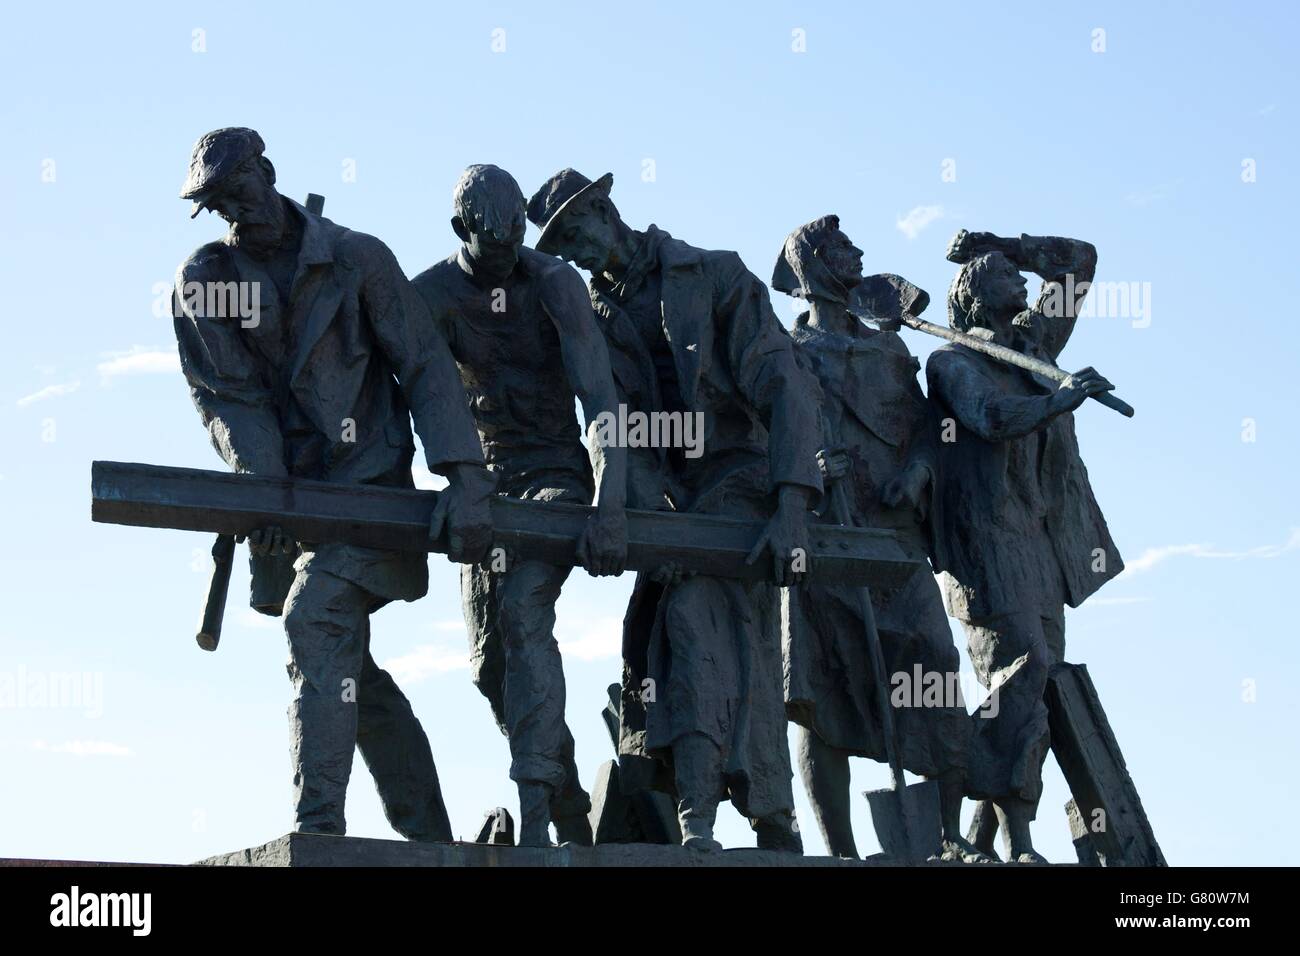 Sculpture of volunteers building city defences, Monument to the Heroic Defenders of Leningrad, Victory Square, Ploshchad Pobedy, Stock Photo